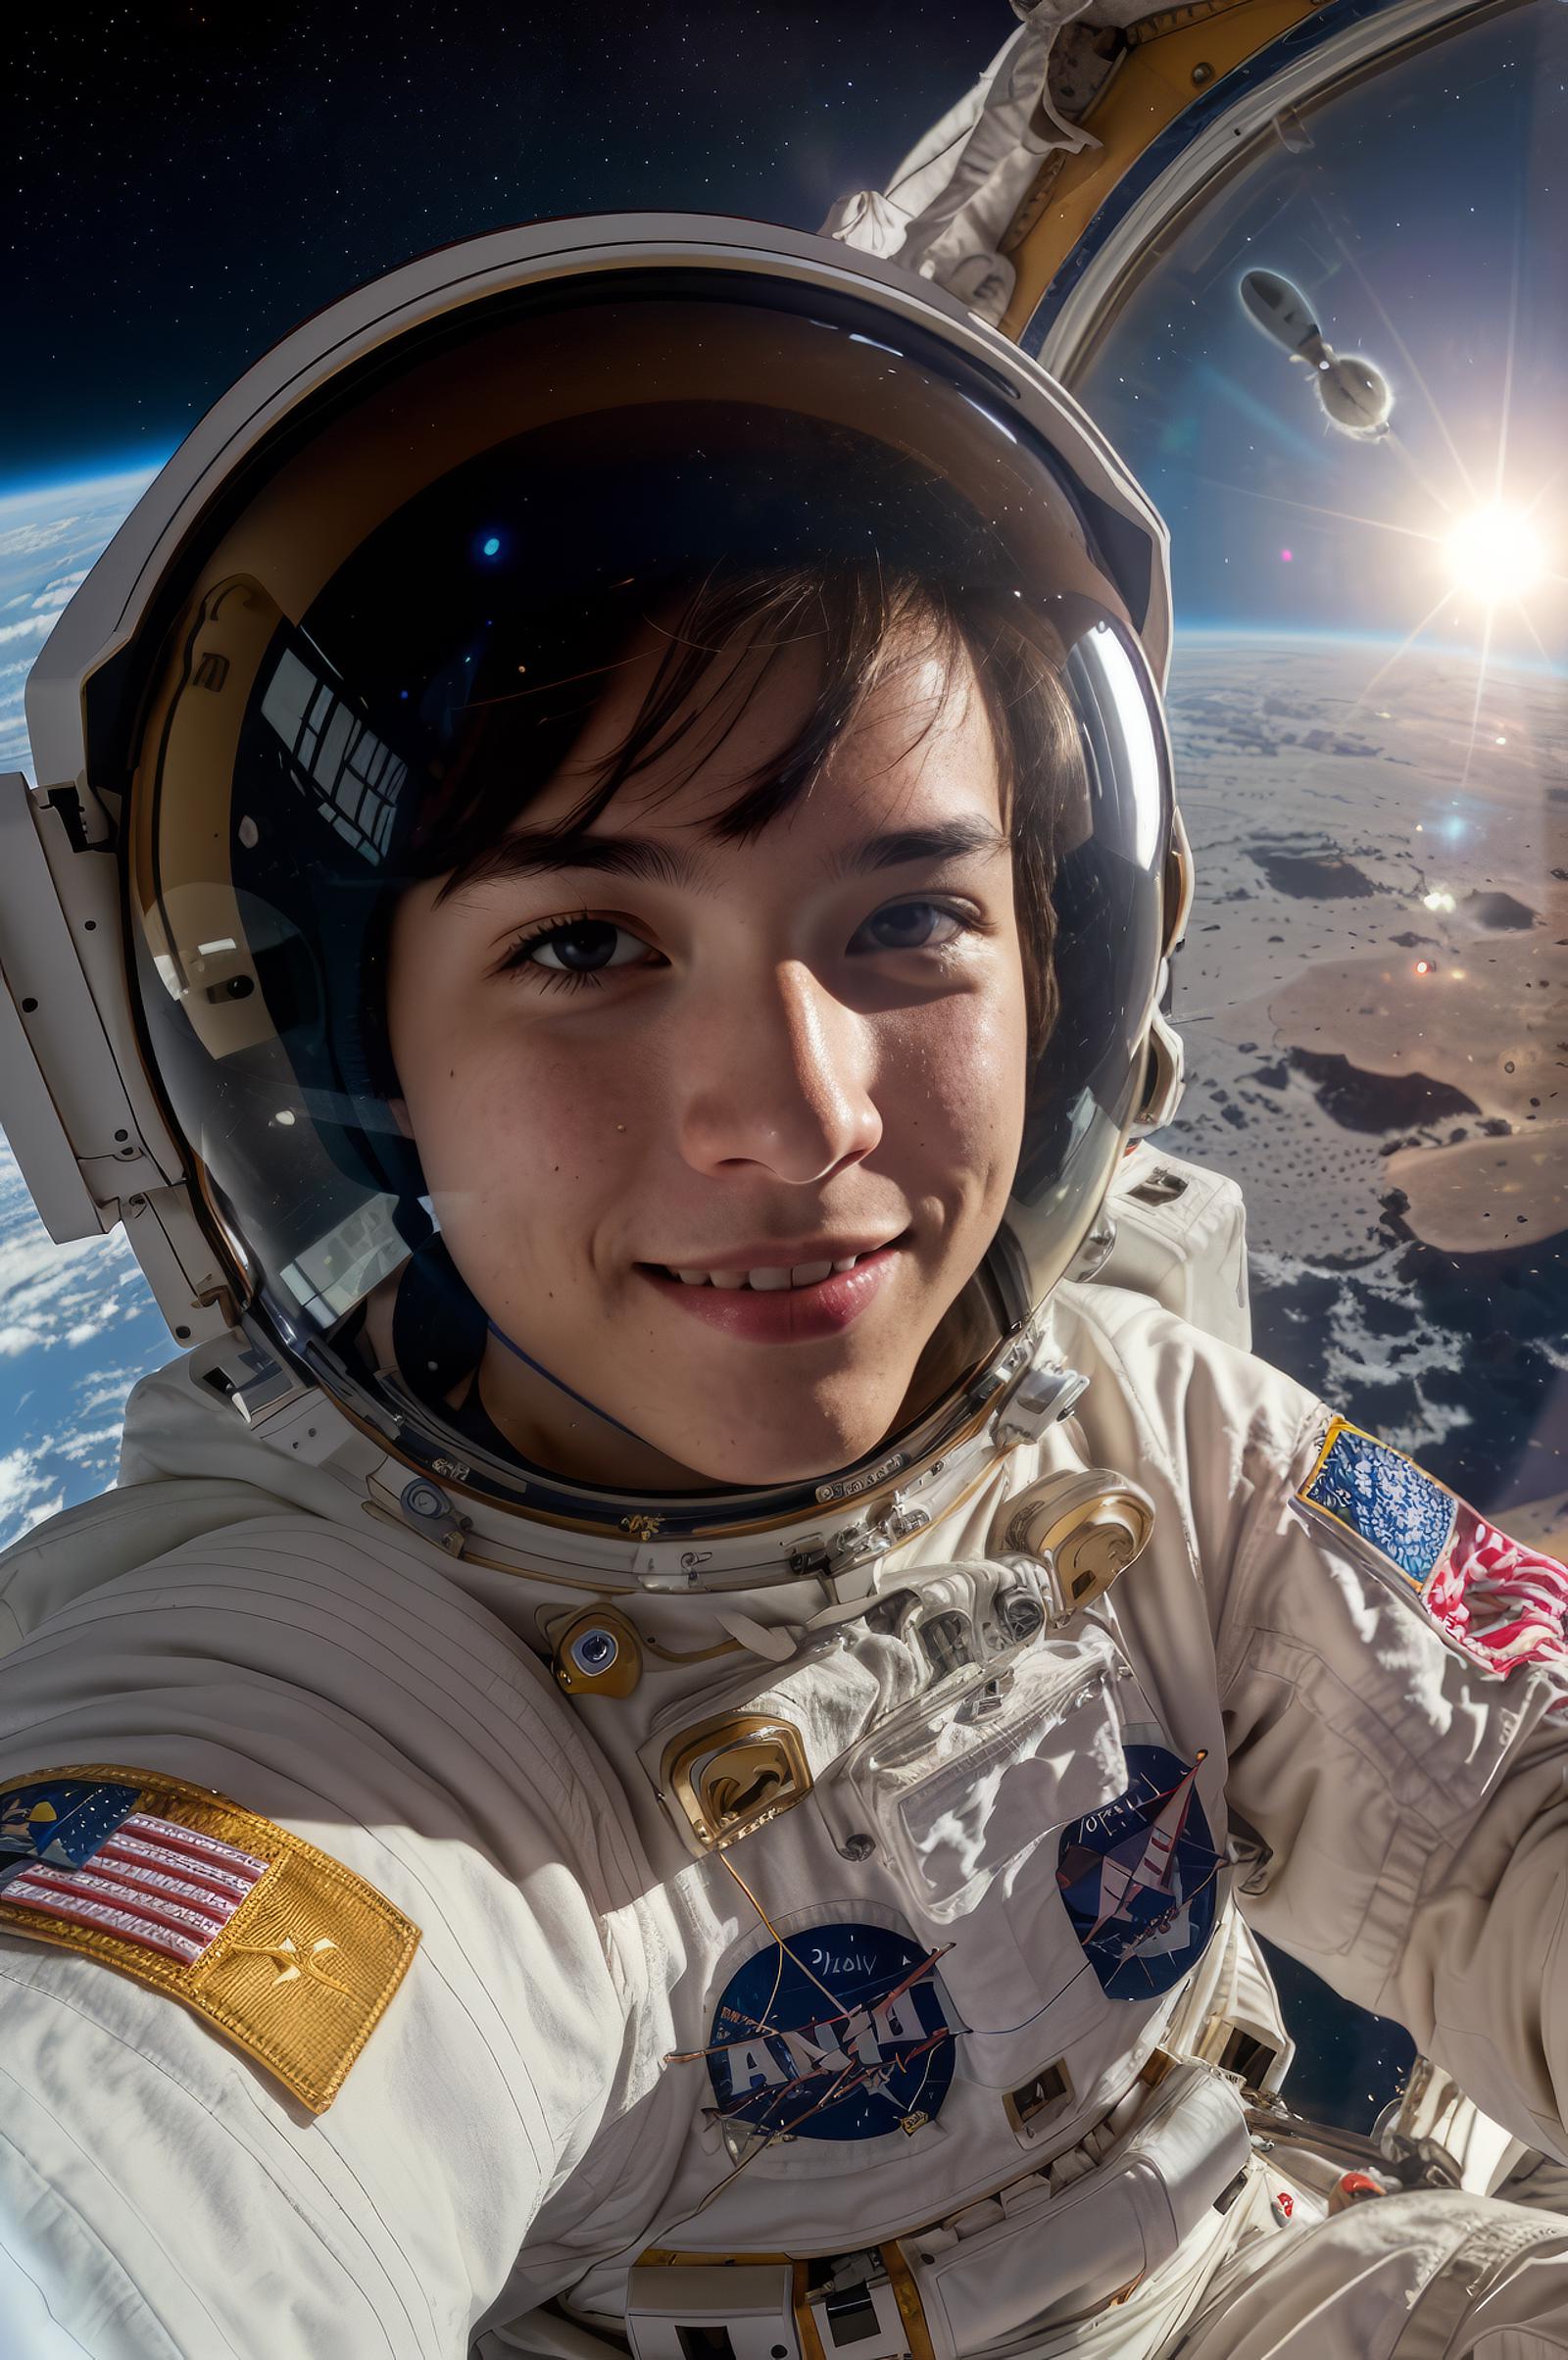 A smiling astronaut in a white suit posing for a photo in front of a space background.